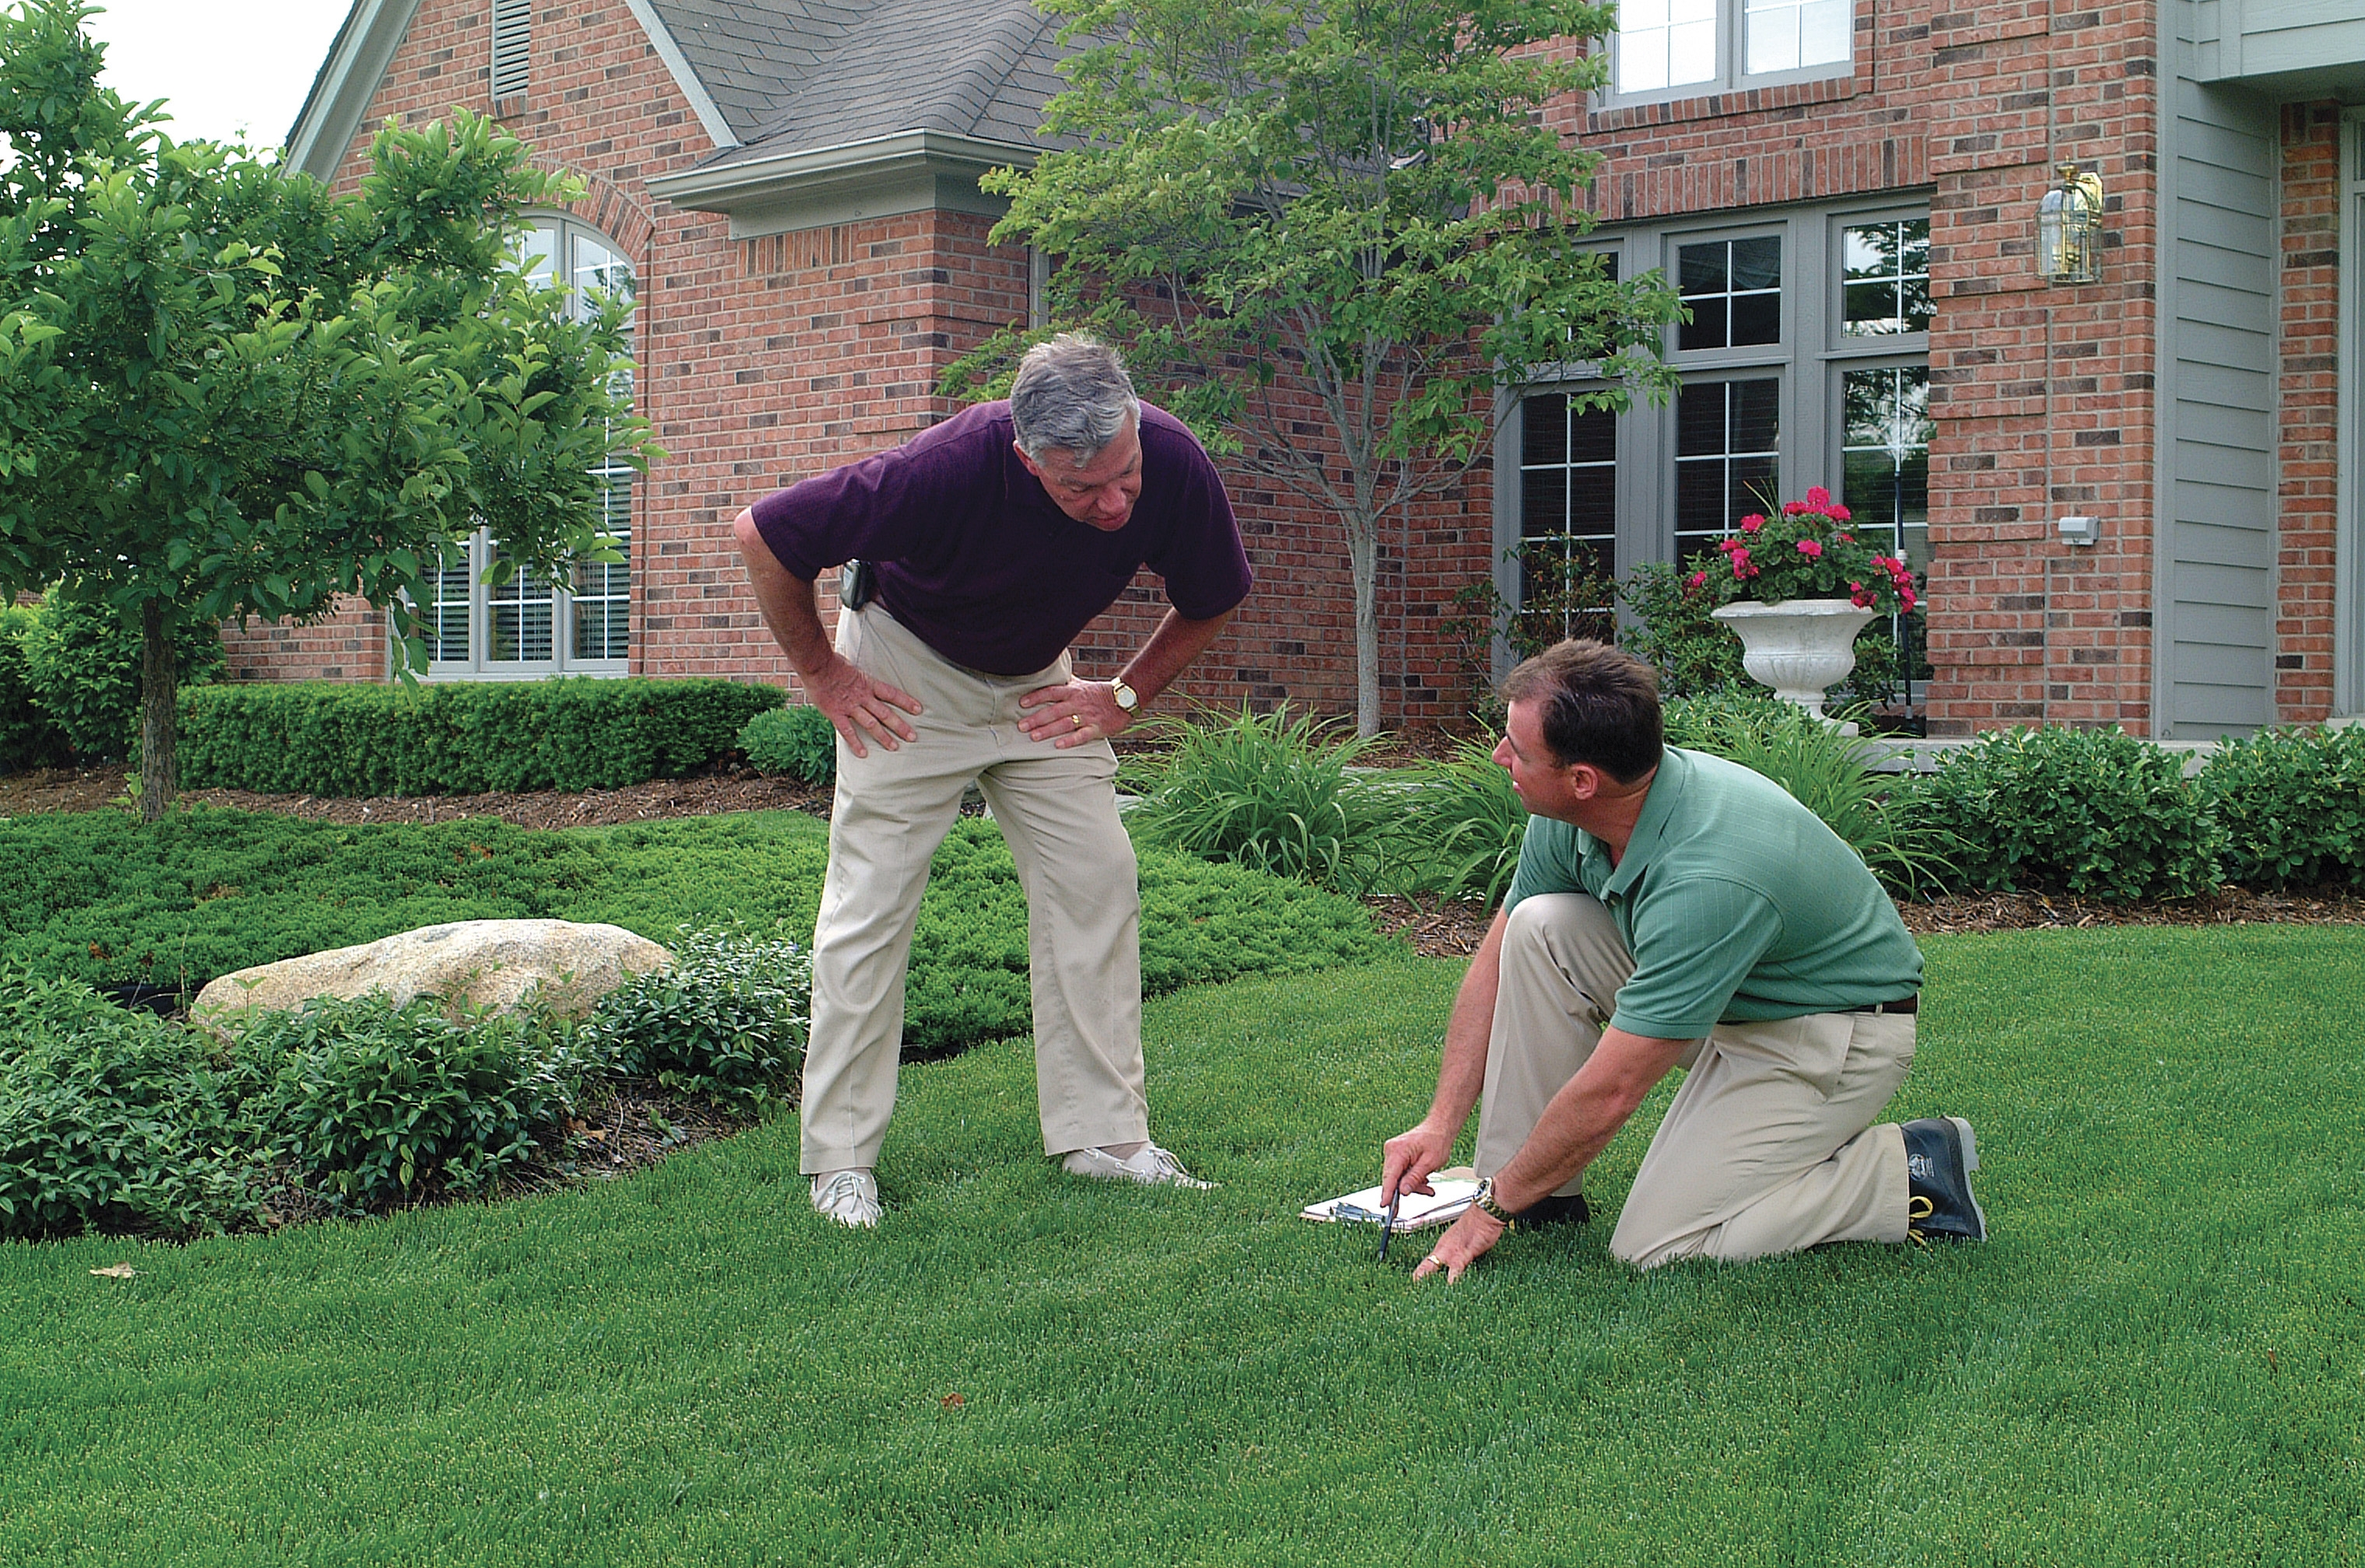 Professional Lawn Care Company in Summit New Jersey | 1.888.Lawntec Services Inc.